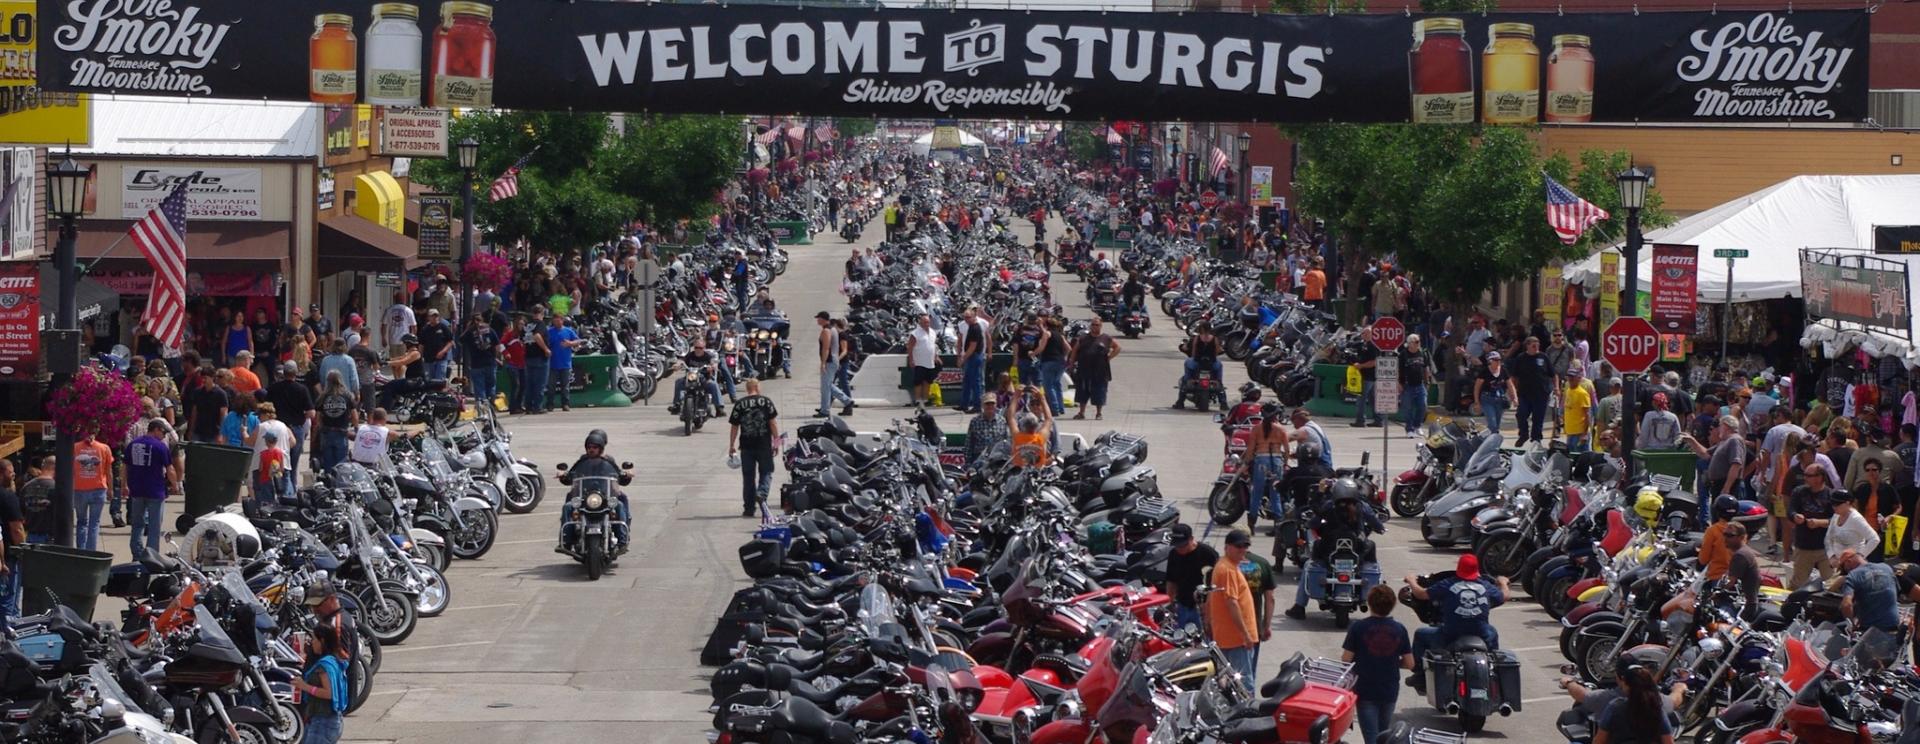 84th Sturgis Motorcycle Rally